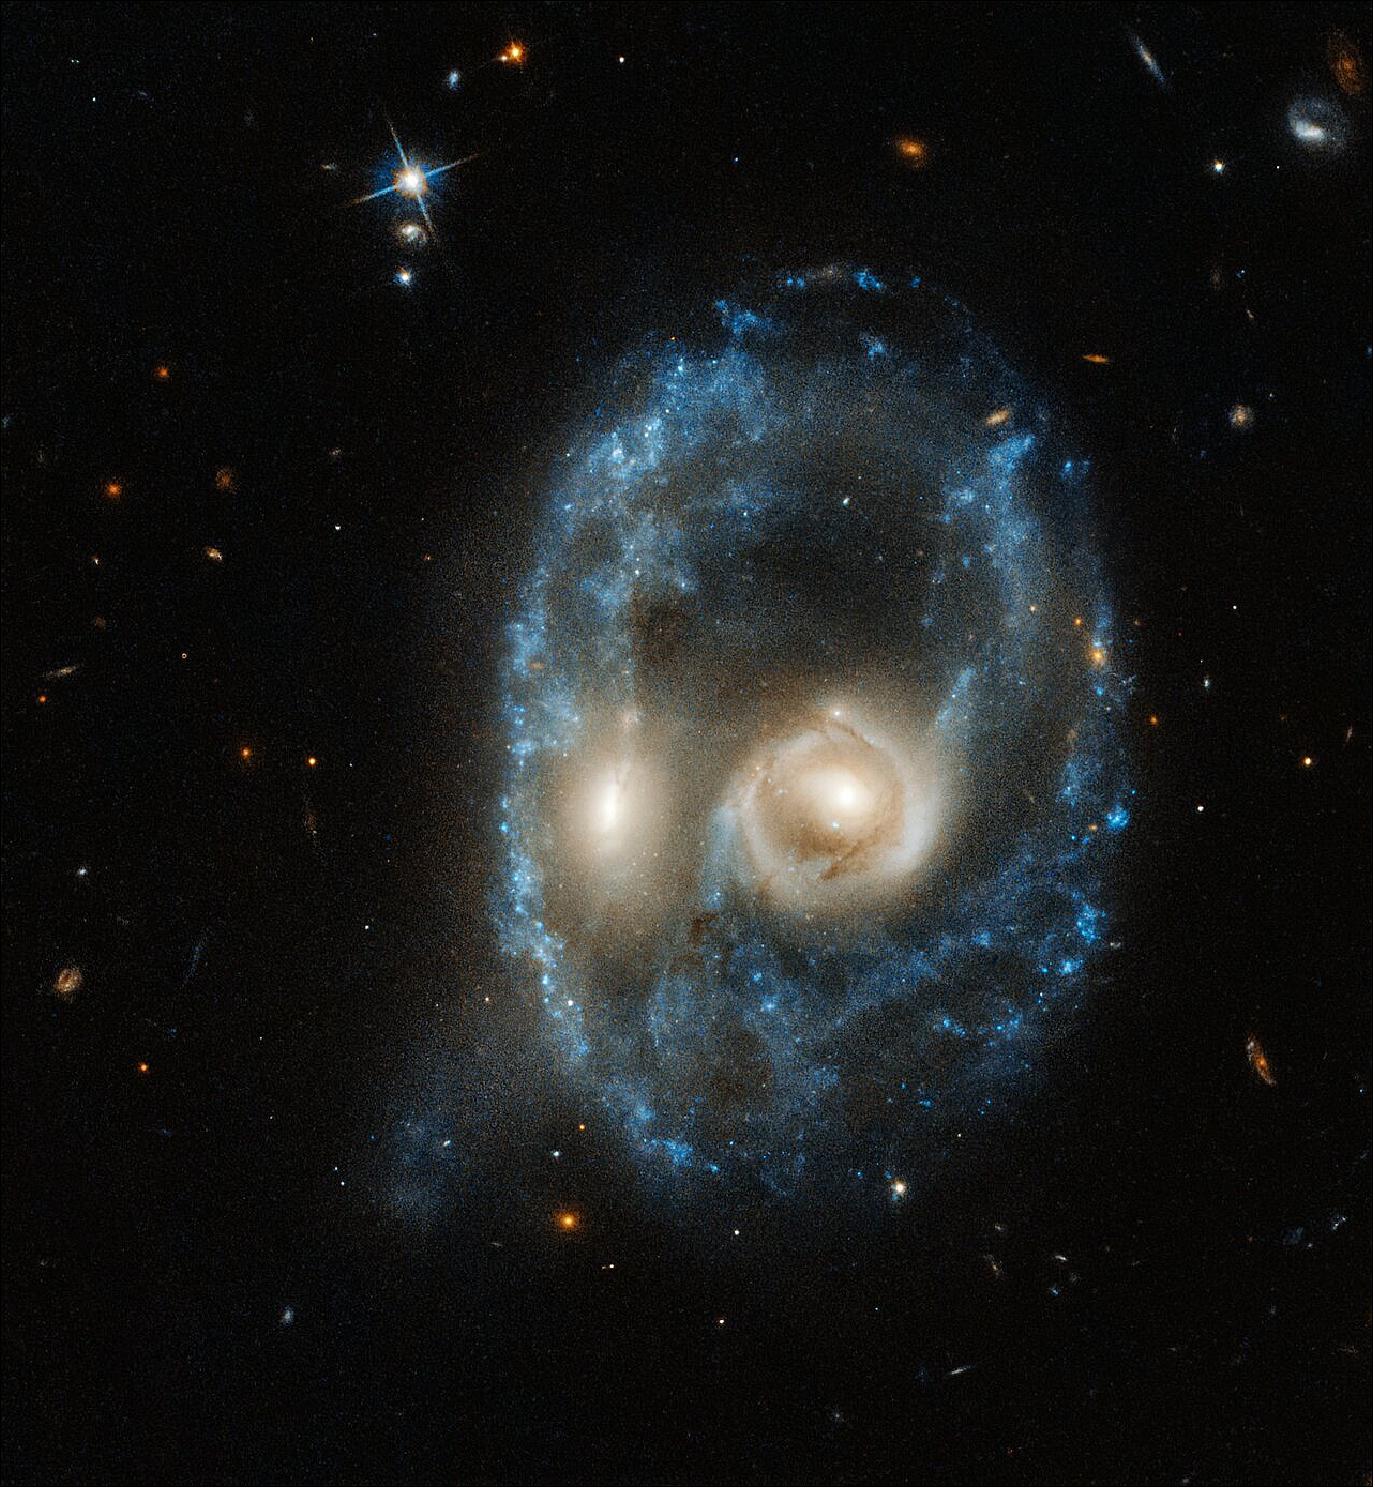 Figure 13: In celebration of Halloween, this new image from the NASA/ESA Hubble Space Telescope captures two galaxies of equal size in a collision that appears to resemble a ghostly face. This observation was made on 19 June 2019 in visible light by the telescope’s ACS (Advanced Camera for Surveys). This system is catalogued as Arp-Madore 2026-424 (AM 2026-424) in the Arp-Madore “Catalog of Southern Peculiar Galaxies and Associations”[image credit: NASA, ESA, J. Dalcanton, B. F. Williams, and M. Durbin (University of Washington)]